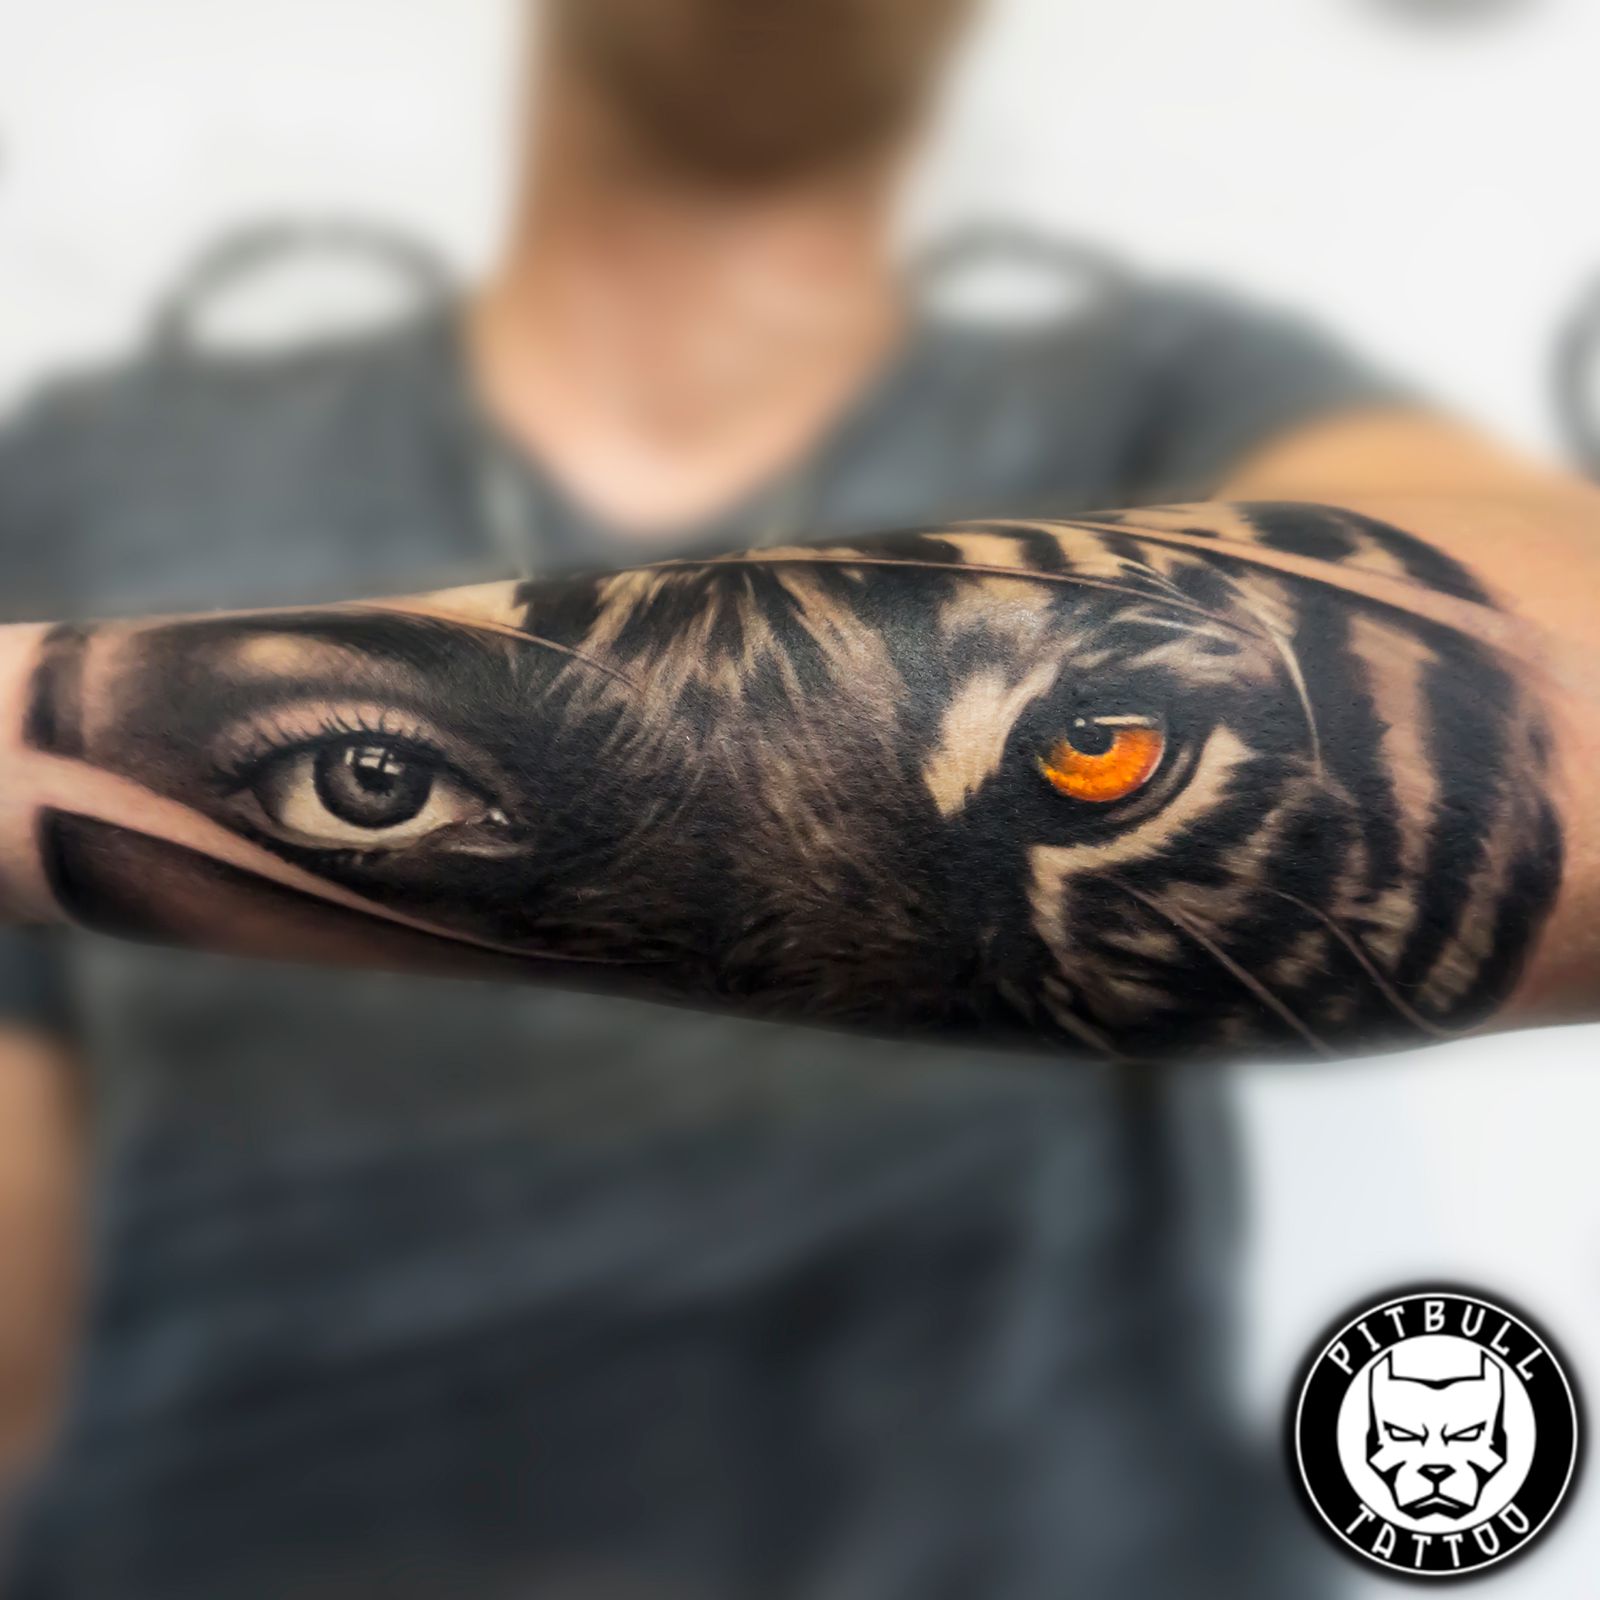 Tiger Eyes done by Gun03_ in Private Studio. Los Angeles CA : r/tattoo